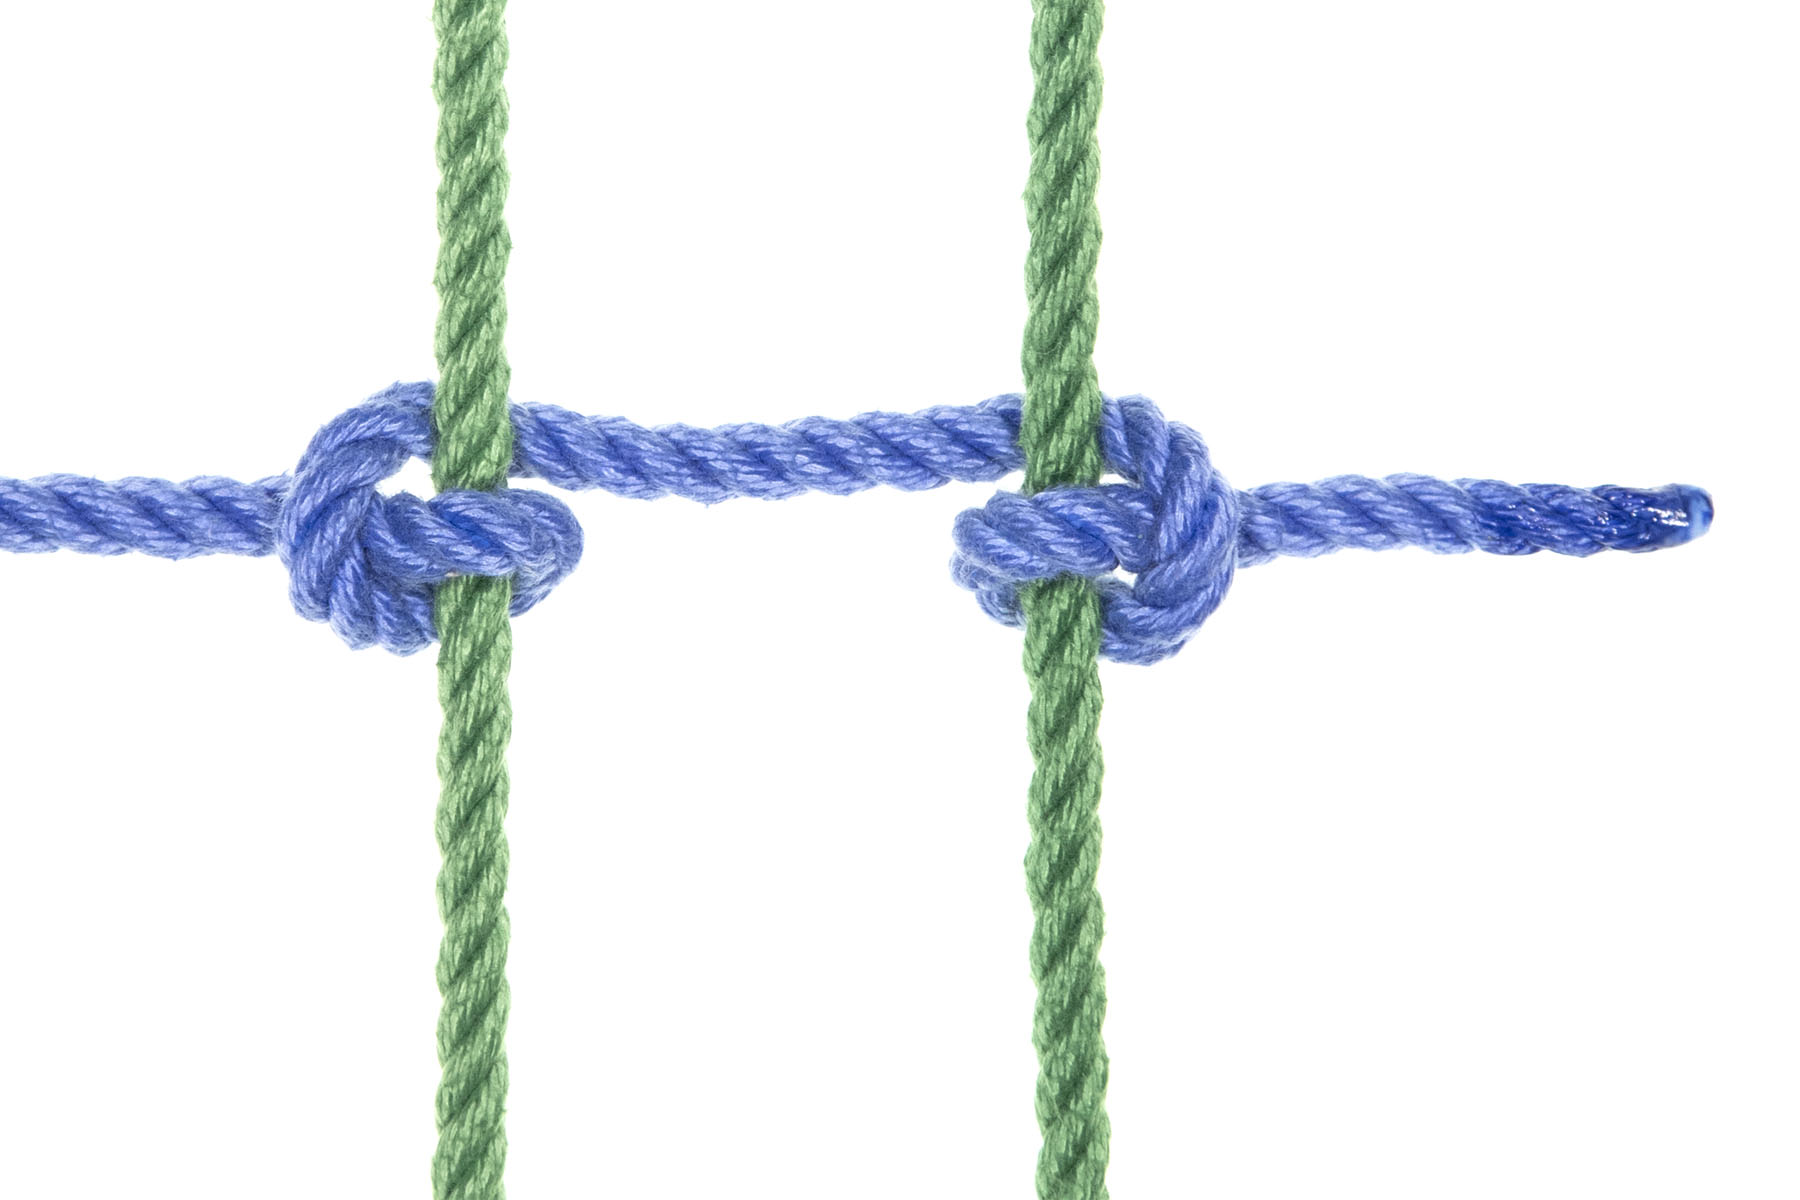 Two green ropes cross the frame vertically. A blue rope enters from the left, making a standard Munter where it crosses the first green rope and a mirror Munter where it crosses the second one. The standard Munter goes over the green rope, under the green rope, over itself, and under the green rope. The mirror Munter goes under the green rope, over itself, under the green rope, over the green rope, and under itself. It is the mirror image of the first Munter.